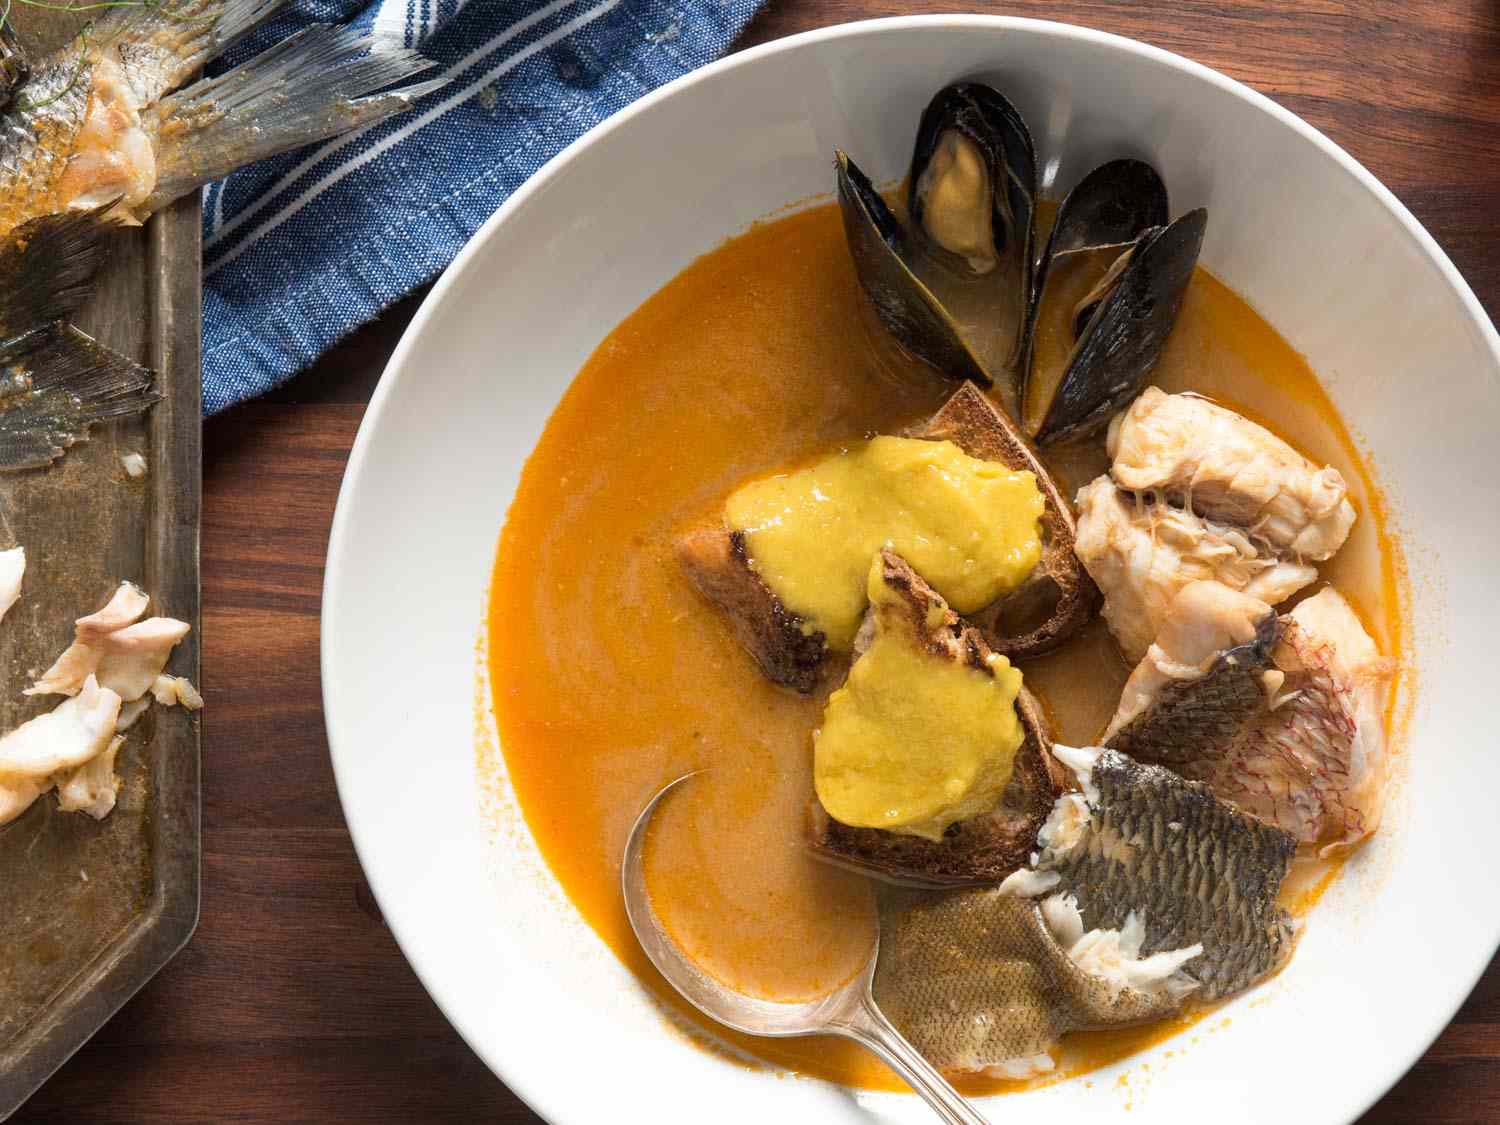 A top down view of a bowl of bouillabaisse, topped with mussels, pieces of fish, and rouille.